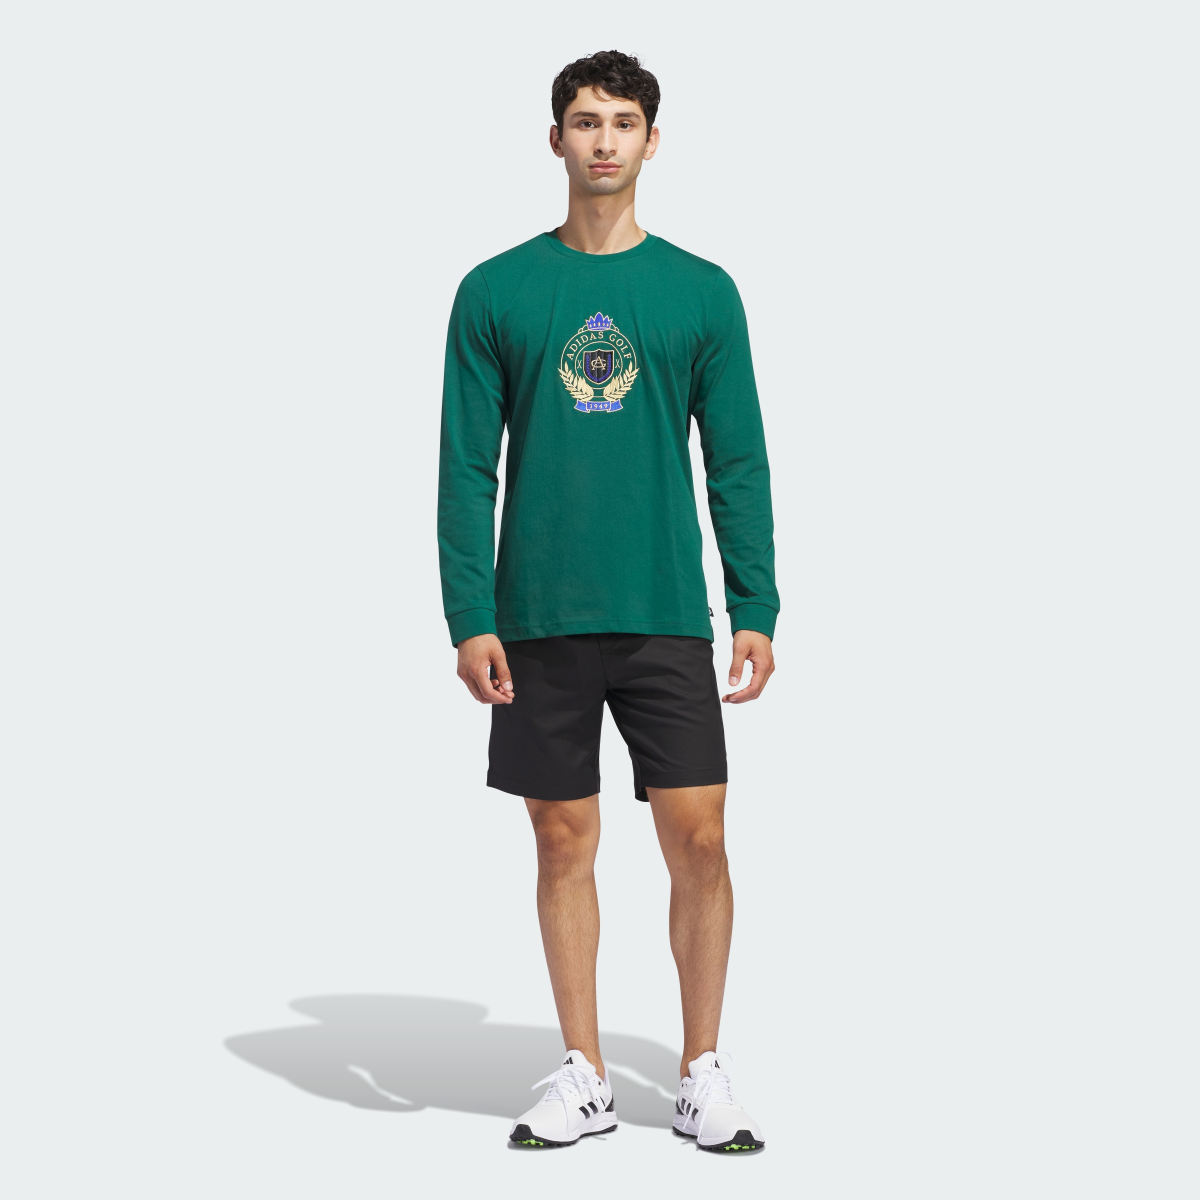 Adidas Go-To Crest Graphic Long Sleeve T-Shirt. 8